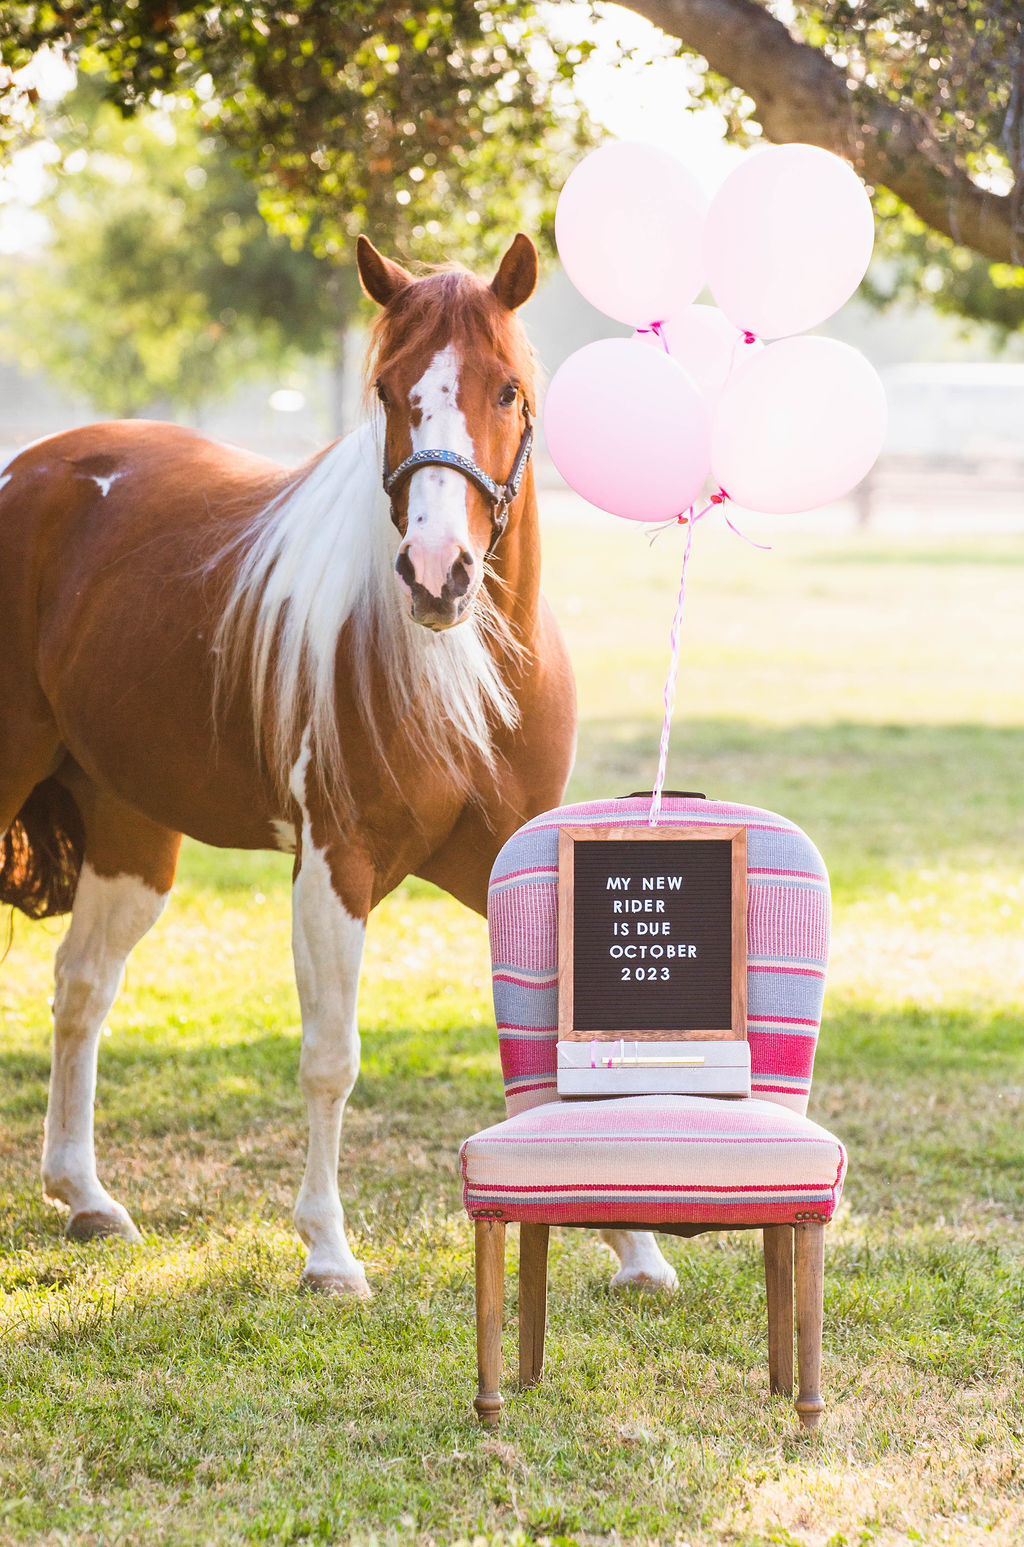 An equestrian themed photo shoot baby announcement